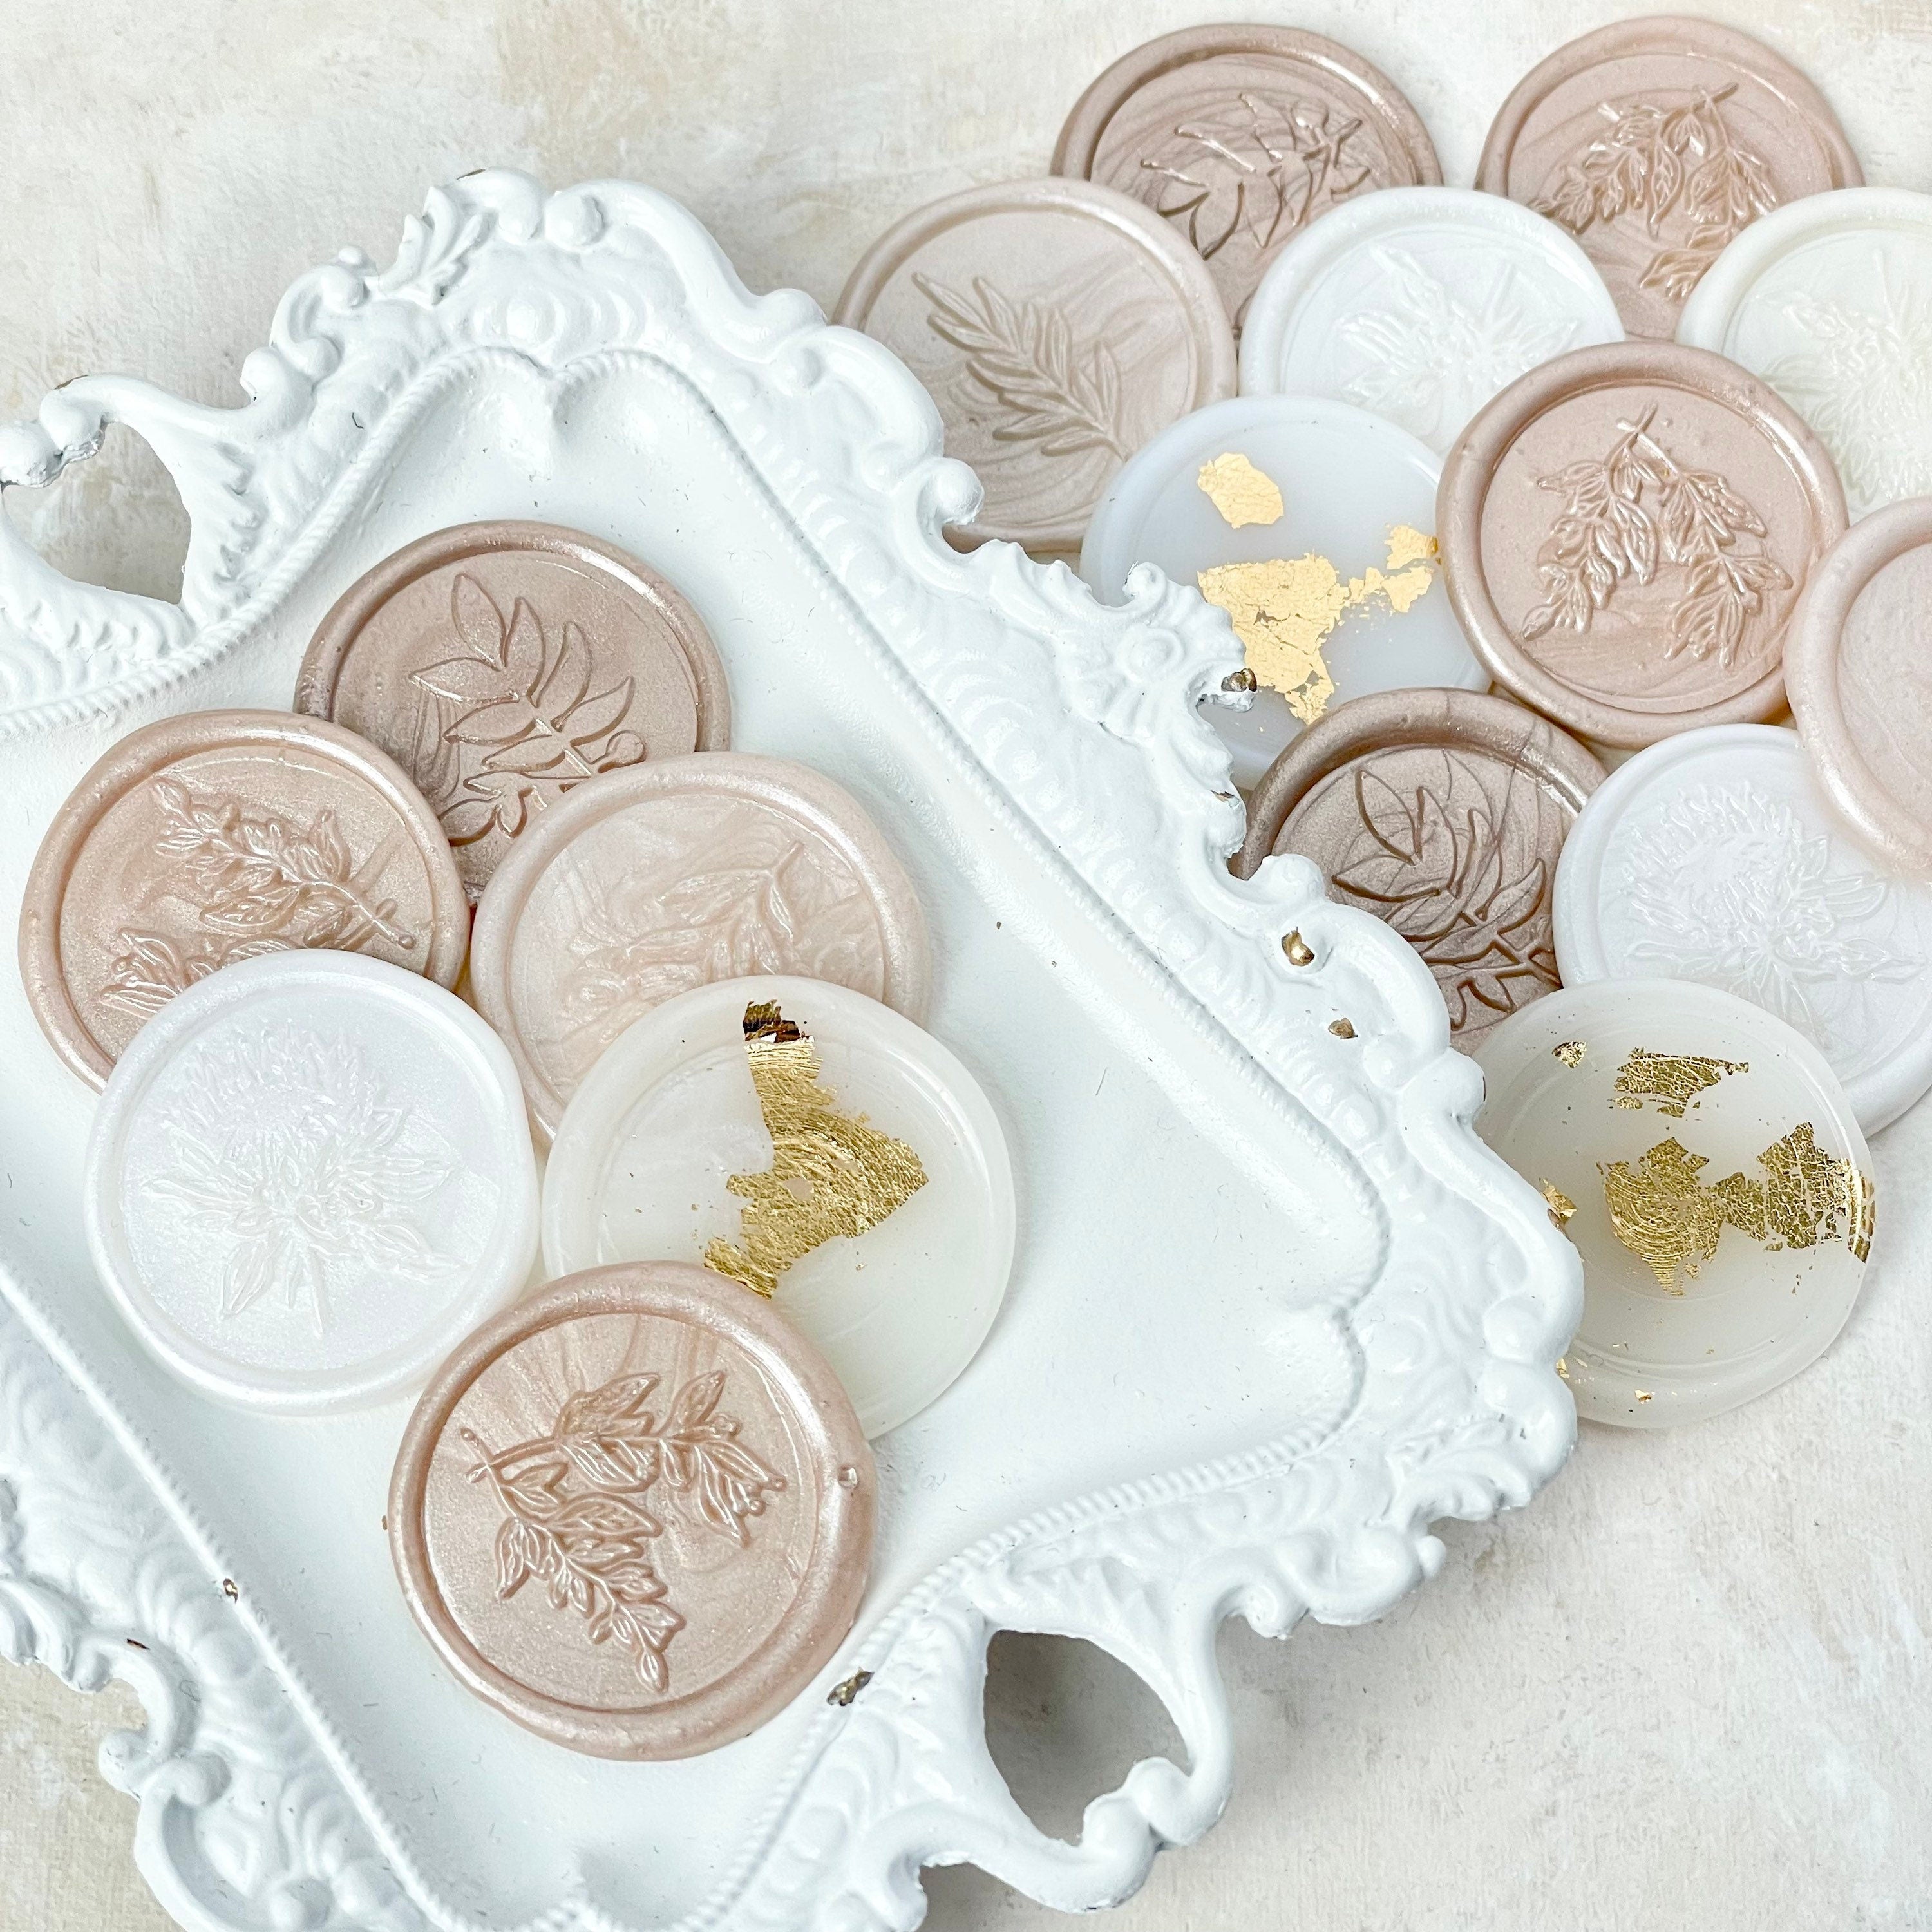 17 champagne wax seals, 6 of them on a white vintage tray - flat lay props from Champagne & GRIT